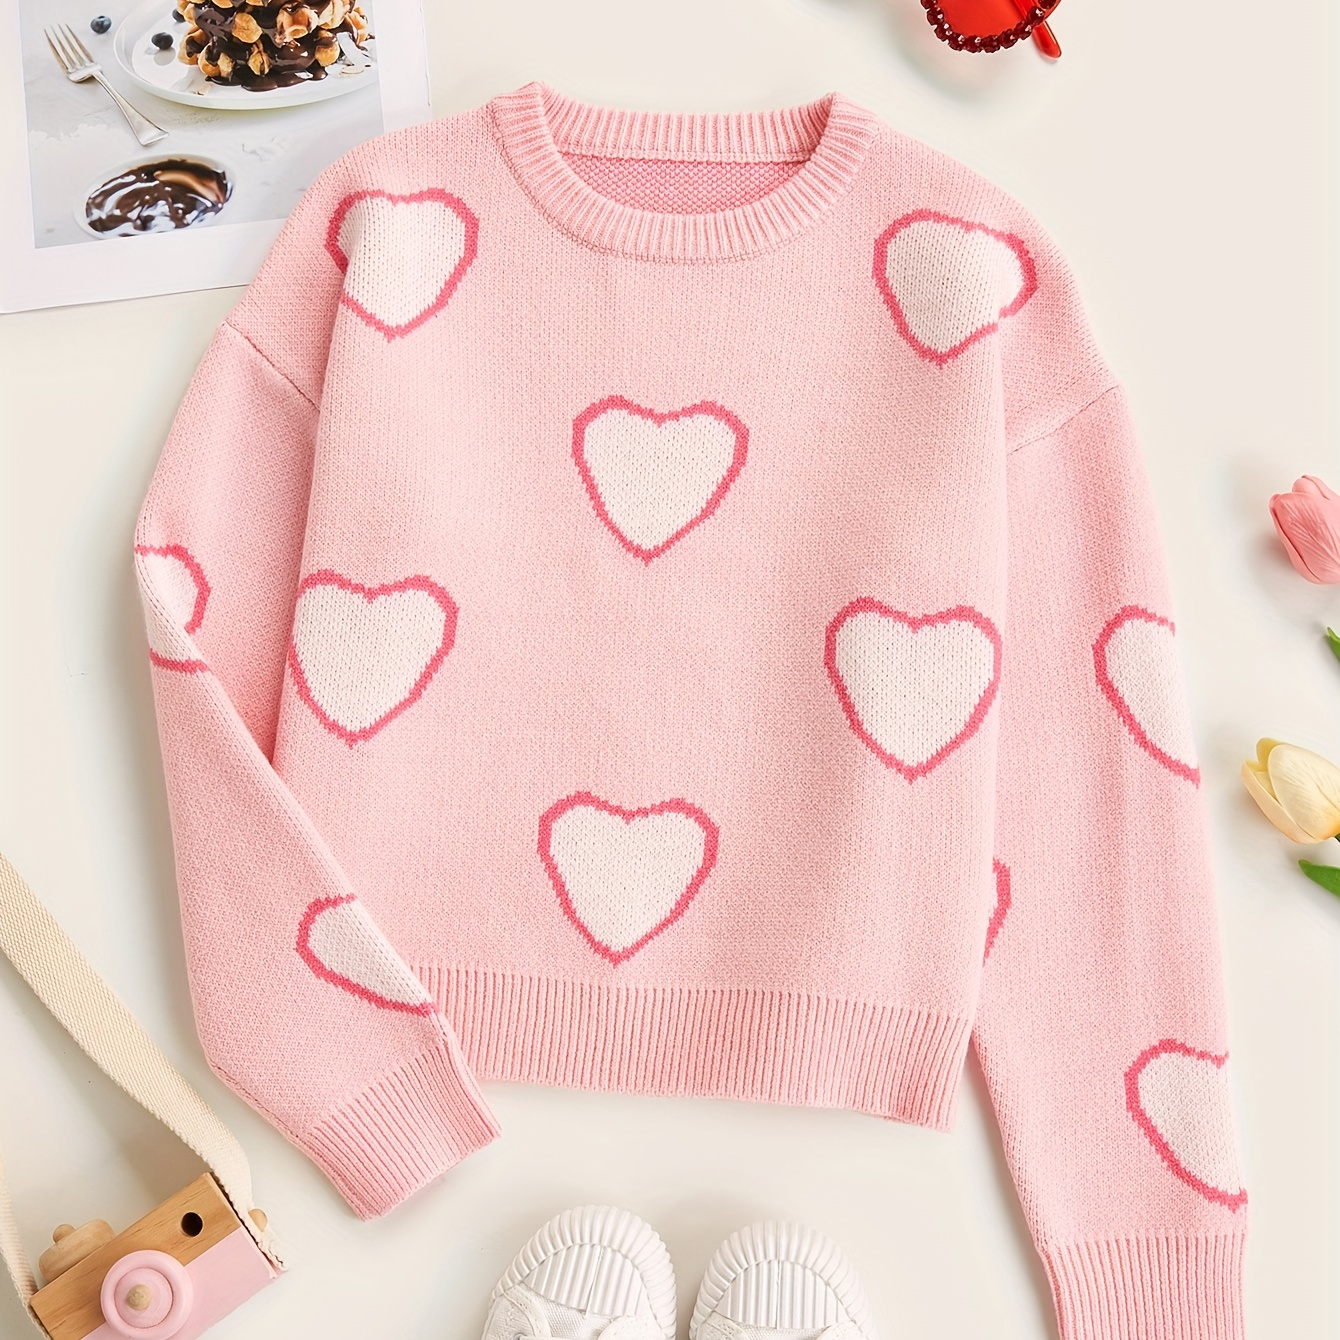 

Cute Hearts Pattern Girls Pullover Knitted Sweater, Comfy Warm Casual Round Neck Jumper Tops, Valentine's Day Gift Idea